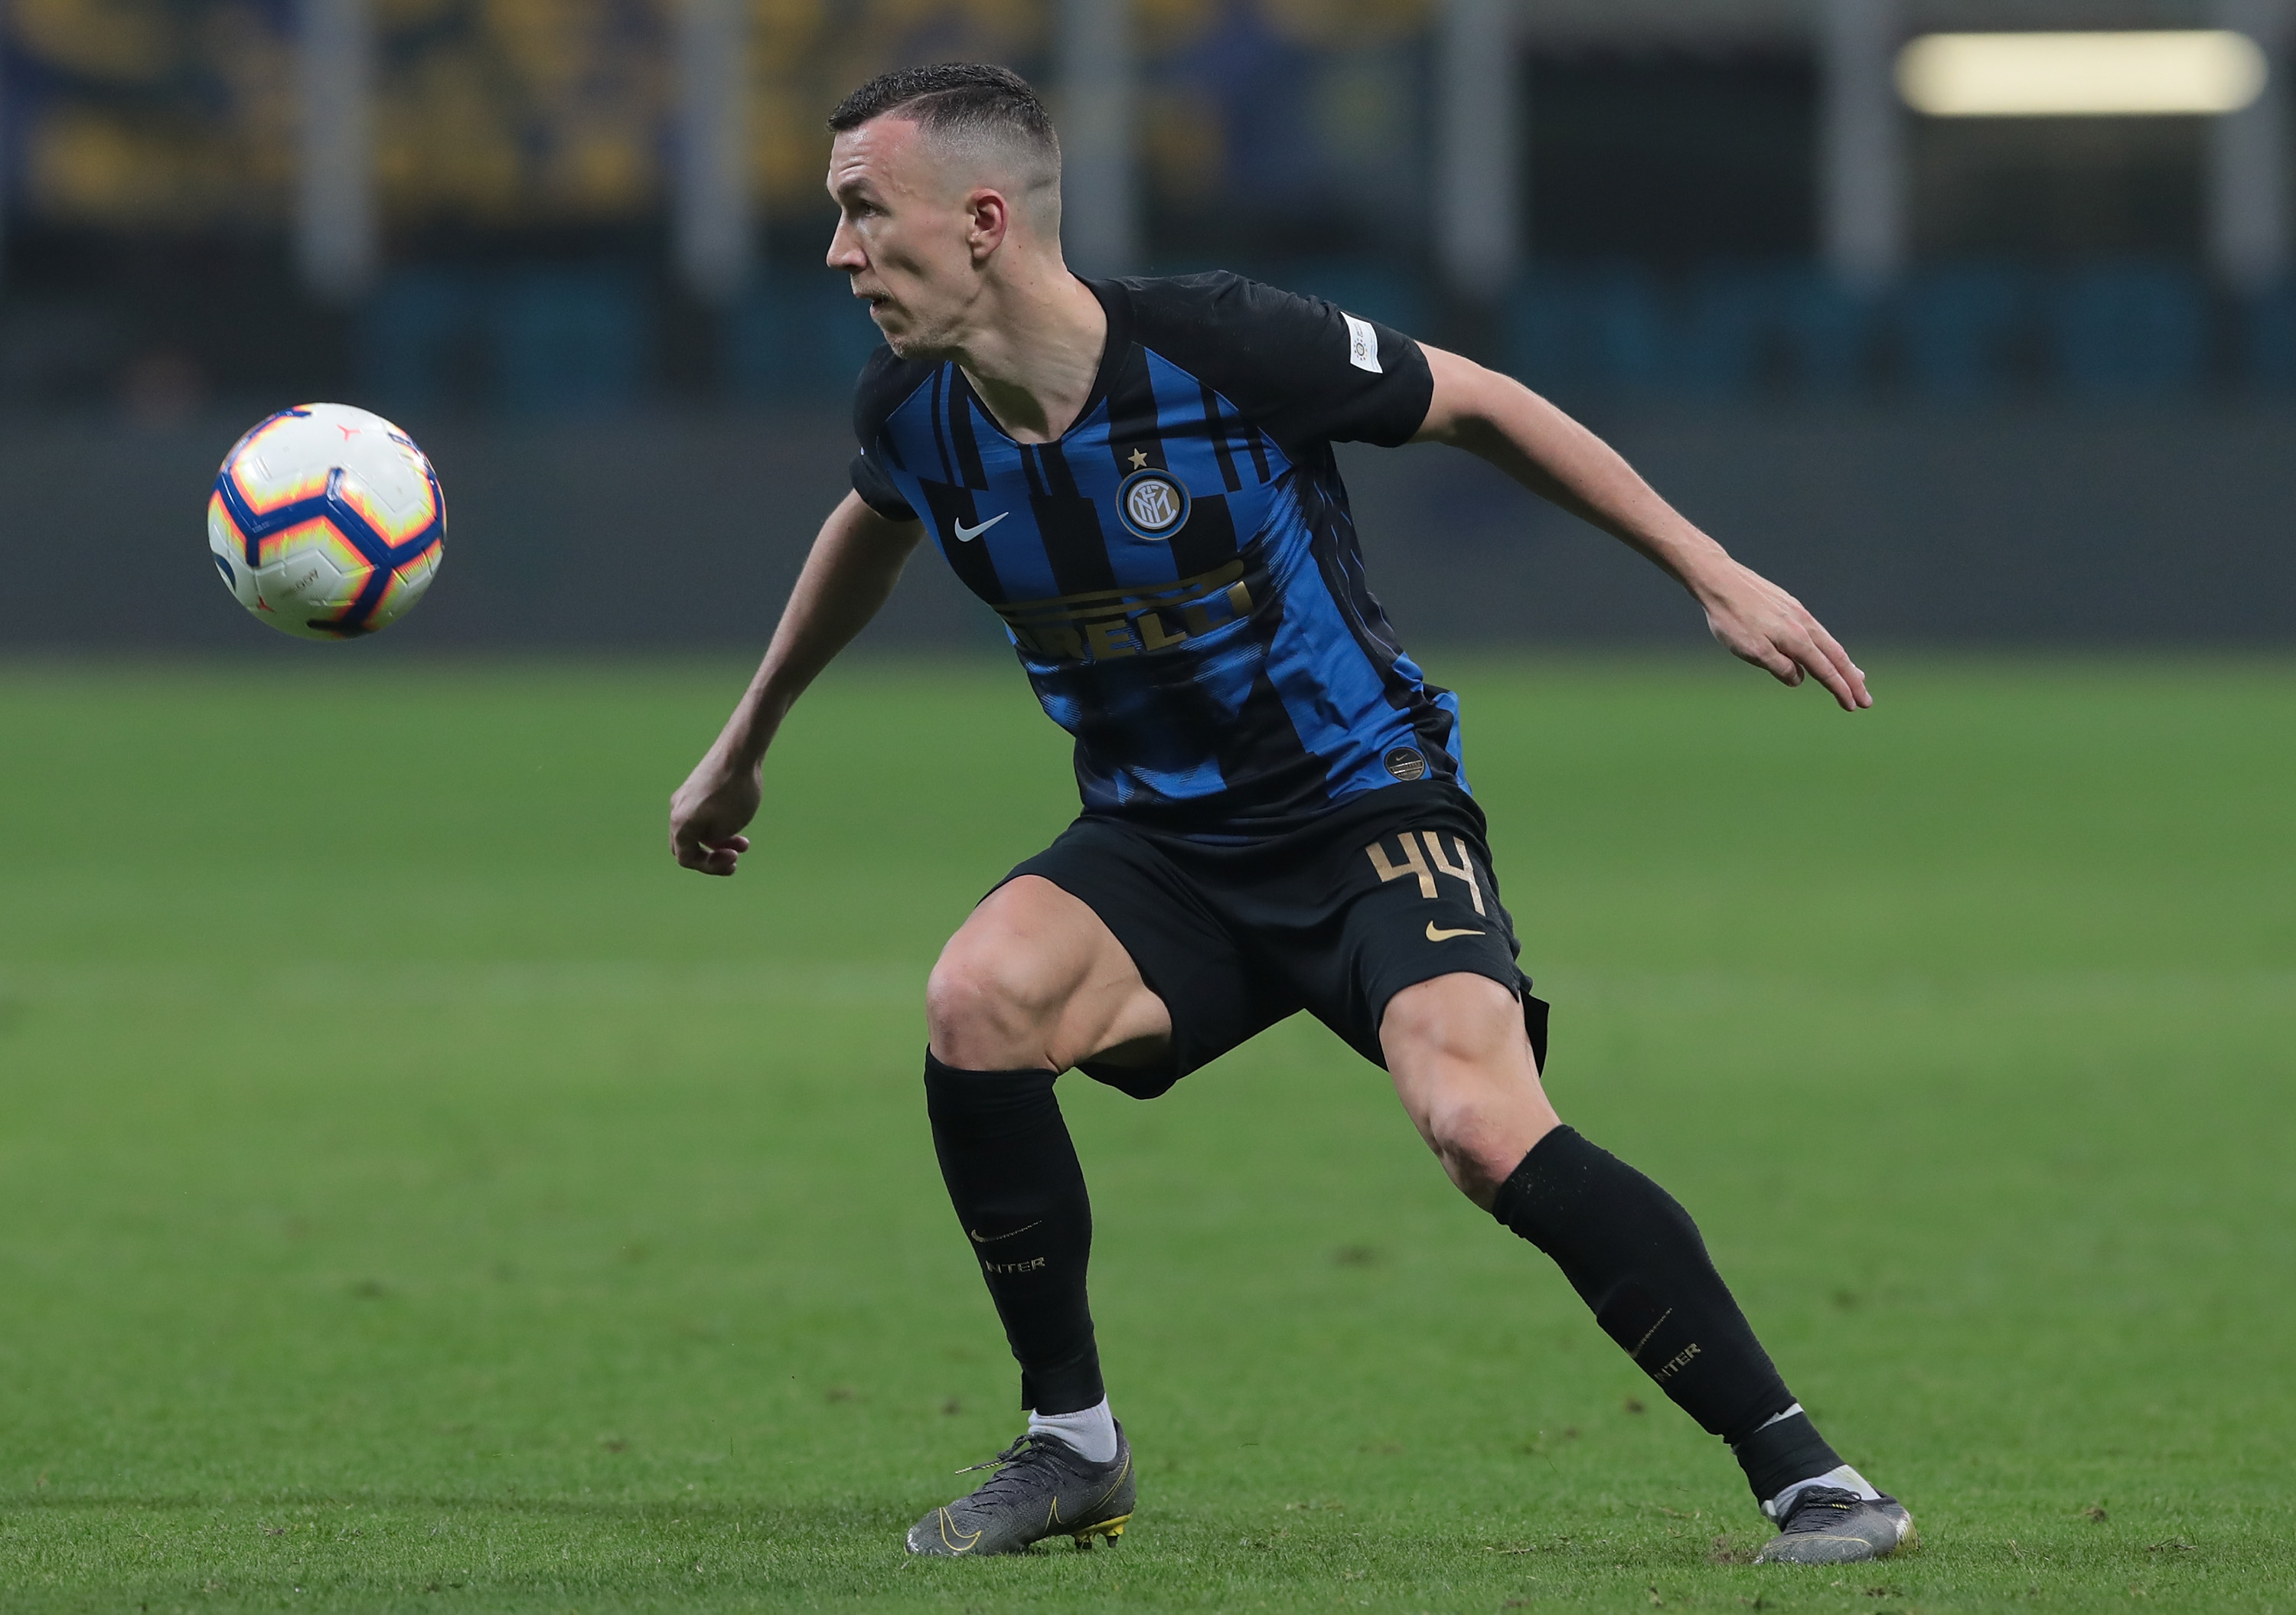 MILAN, ITALY - APRIL 07:  Ivan Perisic of FC Internazionale in action during the Serie A match between FC Internazionale and Atalanta BC at Stadio Giuseppe Meazza on April 7, 2019 in Milan, Italy.  (Photo by Emilio Andreoli/Getty Images )